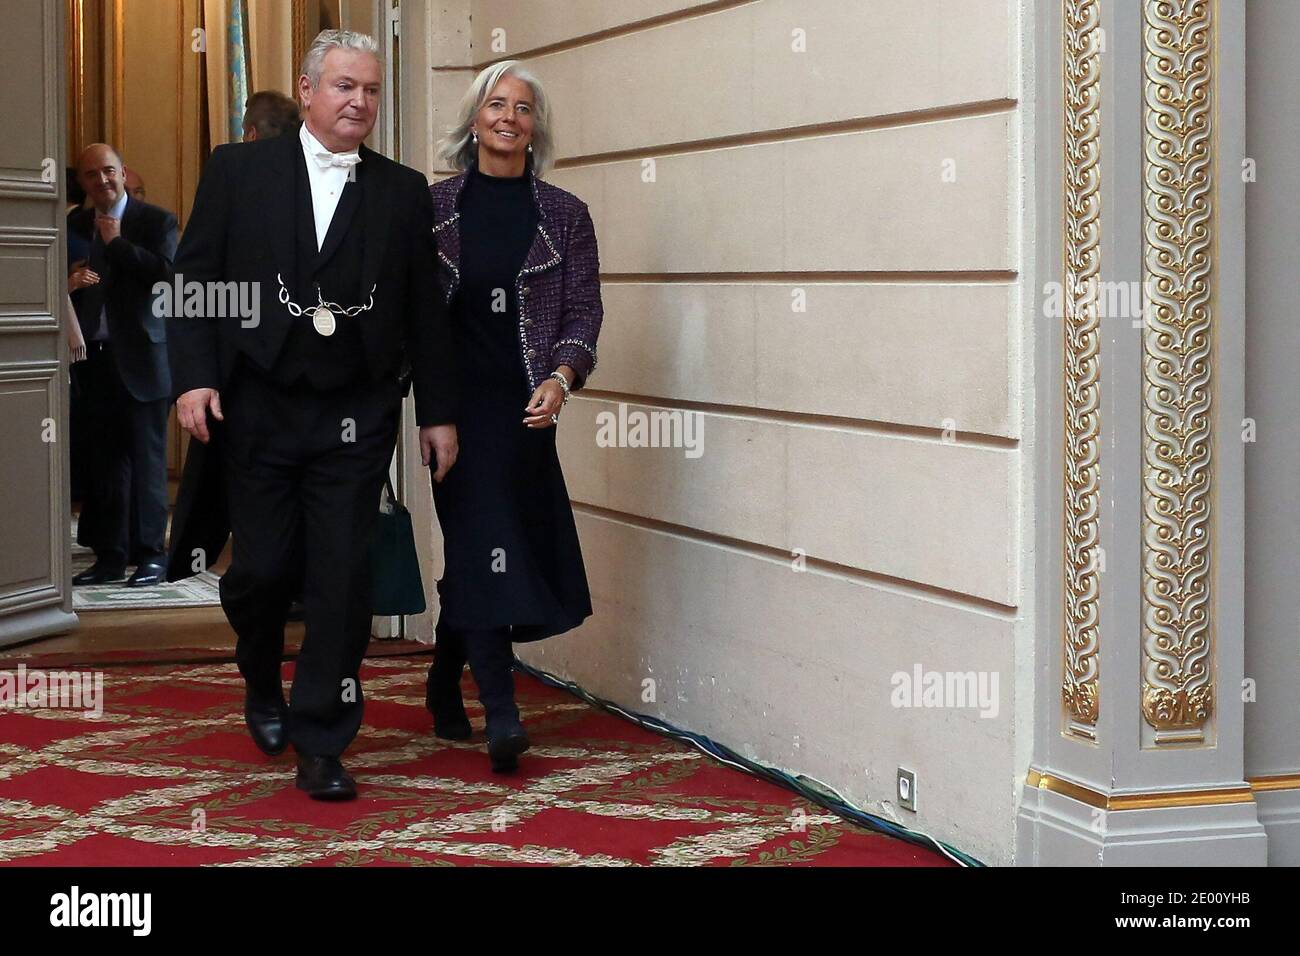 International Monetary Fund (IMF) Managing Director Christine Lagarde arrives for a family photo following a meeting hosted by Hollande with heads of international financial institutions at the Elysee Palace in Paris, France on November 8, 2013. Hollande was set to defend his economic policies after the Standard & Poor's agency lowered France's rating to AA. Photo by Stephane Lemouton/ABACAPRESS.COM Stock Photo